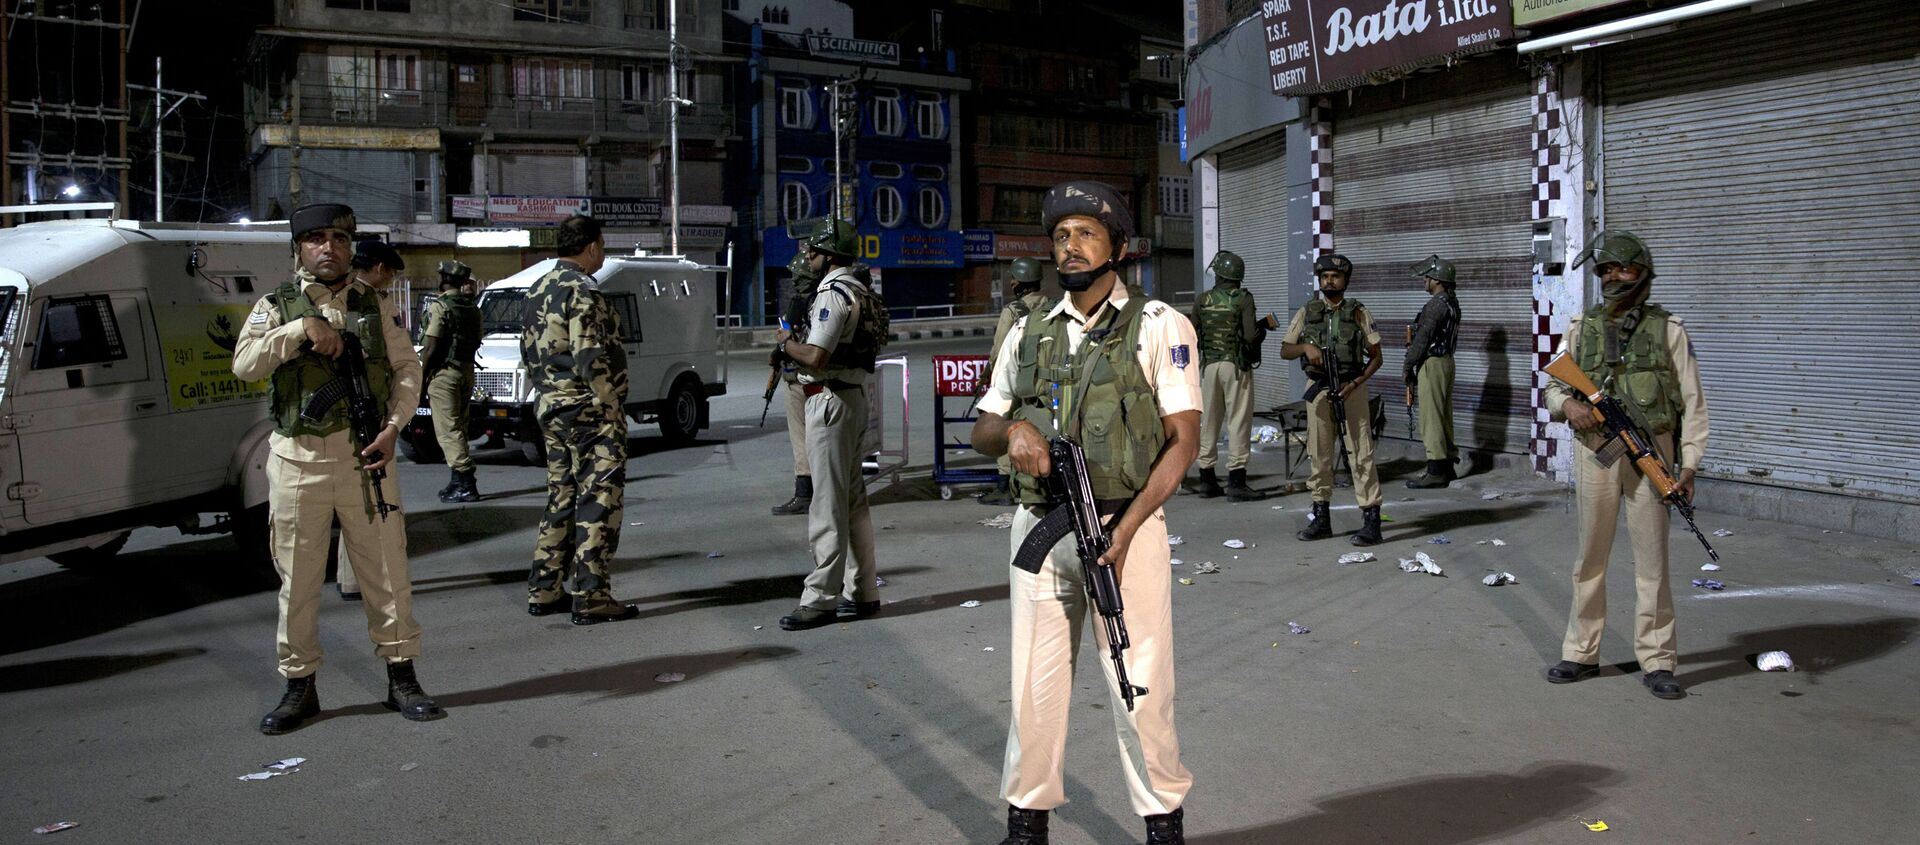 Indian soldiers stand guard in Srinagar, India, Sunday, Aug. 4, 2019. Tensions have soared along the volatile, highly militarized frontier between India and Pakistan in the disputed Himalayan region of Kashmir, as India has deployed more troops and ordered thousands of visitors out of the region - Sputnik International, 1920, 05.08.2021